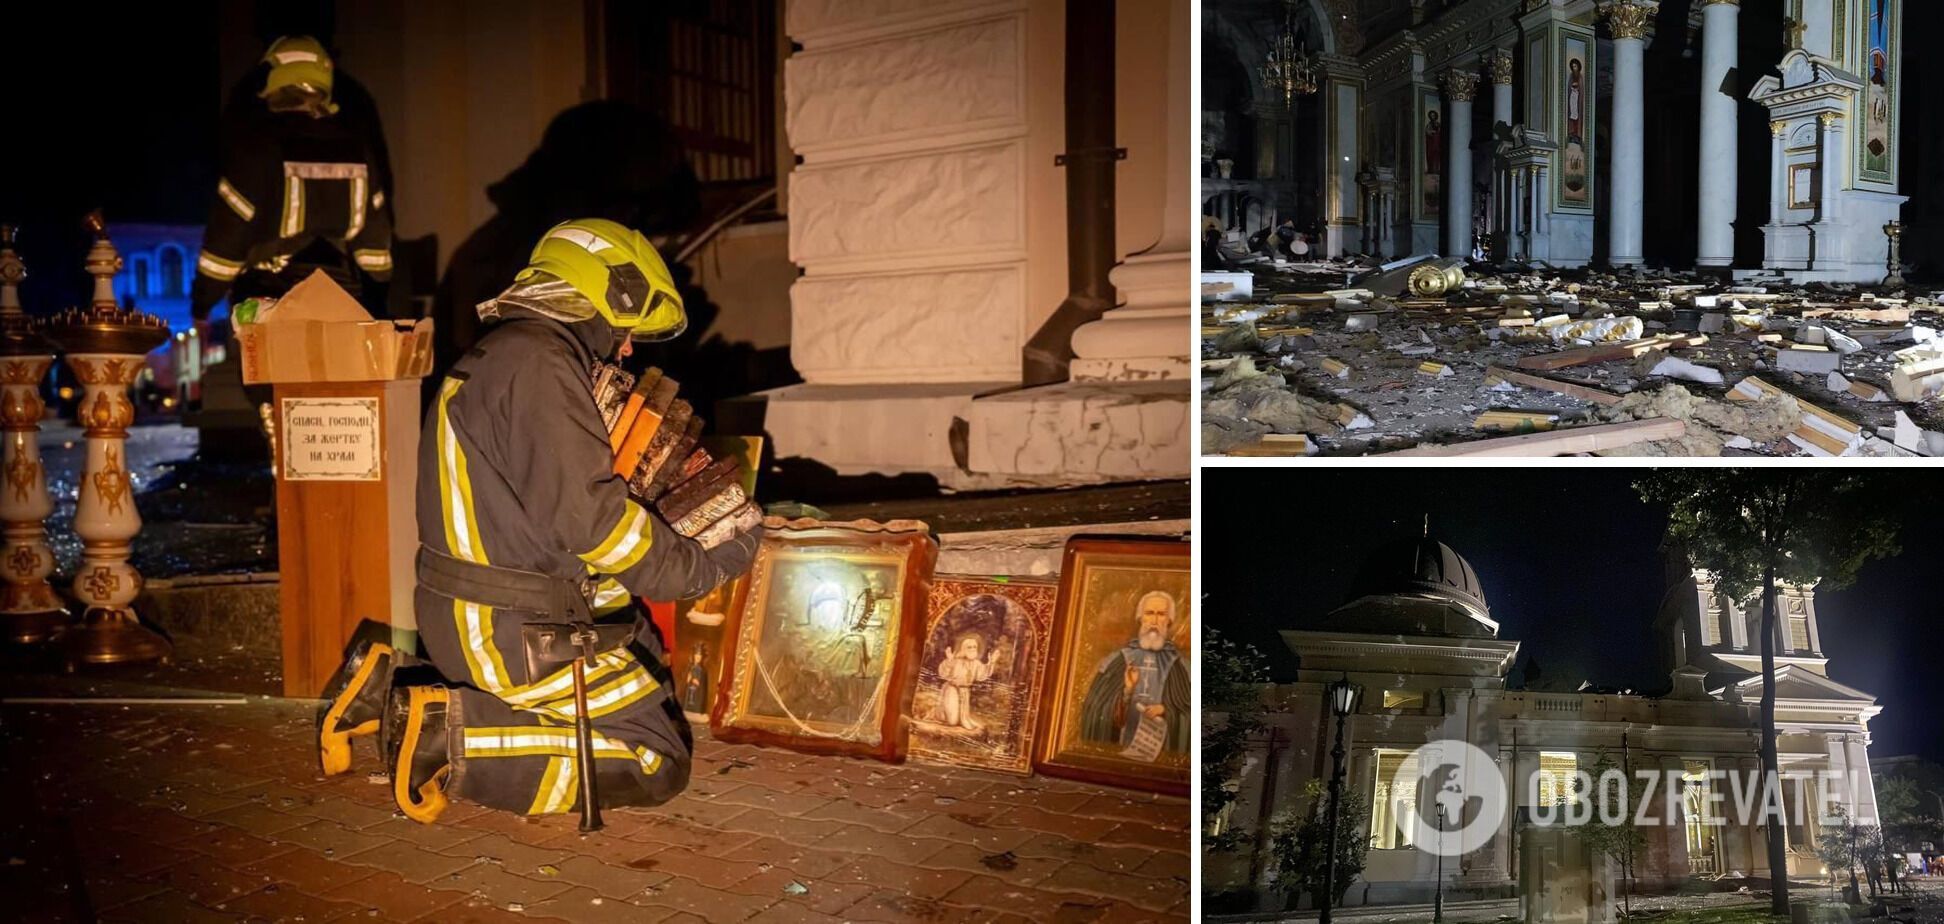 New photos and details of the night attack of the Russian Federation on Odesa have appeared: destruction in the city, UOC-MP cathedral damaged